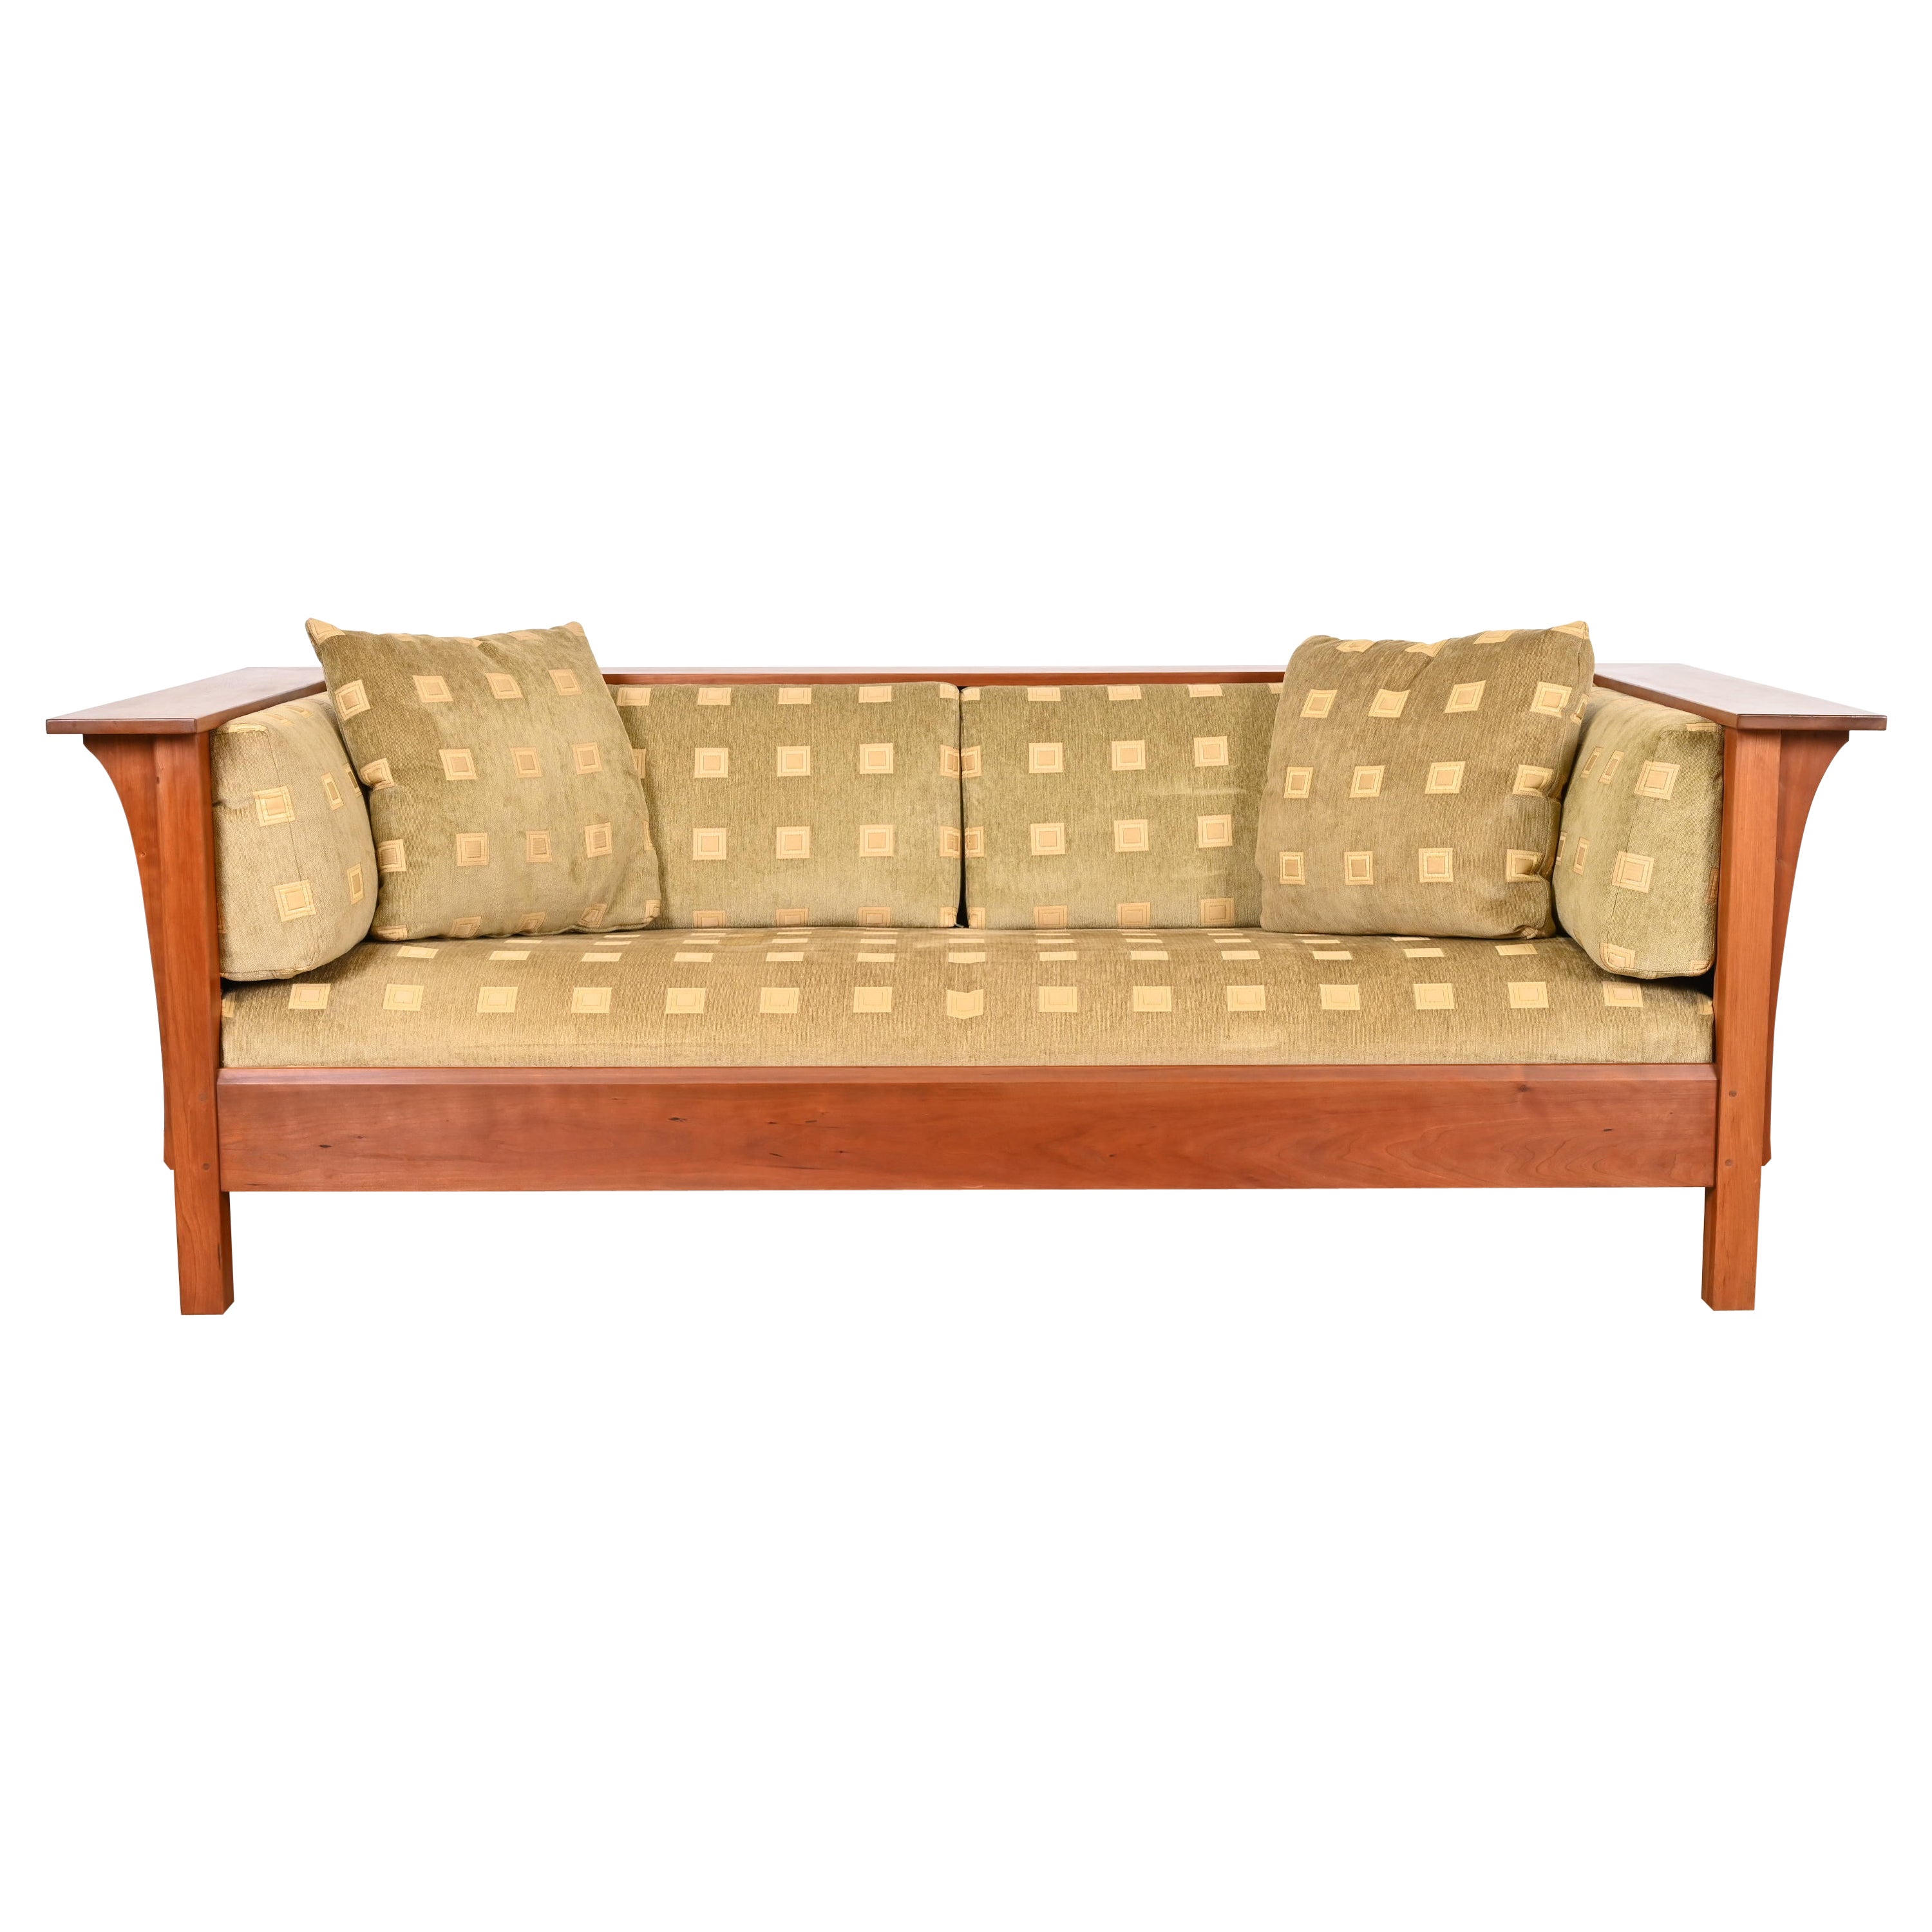 Stickley Mission Arts and Crafts Cherry Wood Settle Sofa For Sale